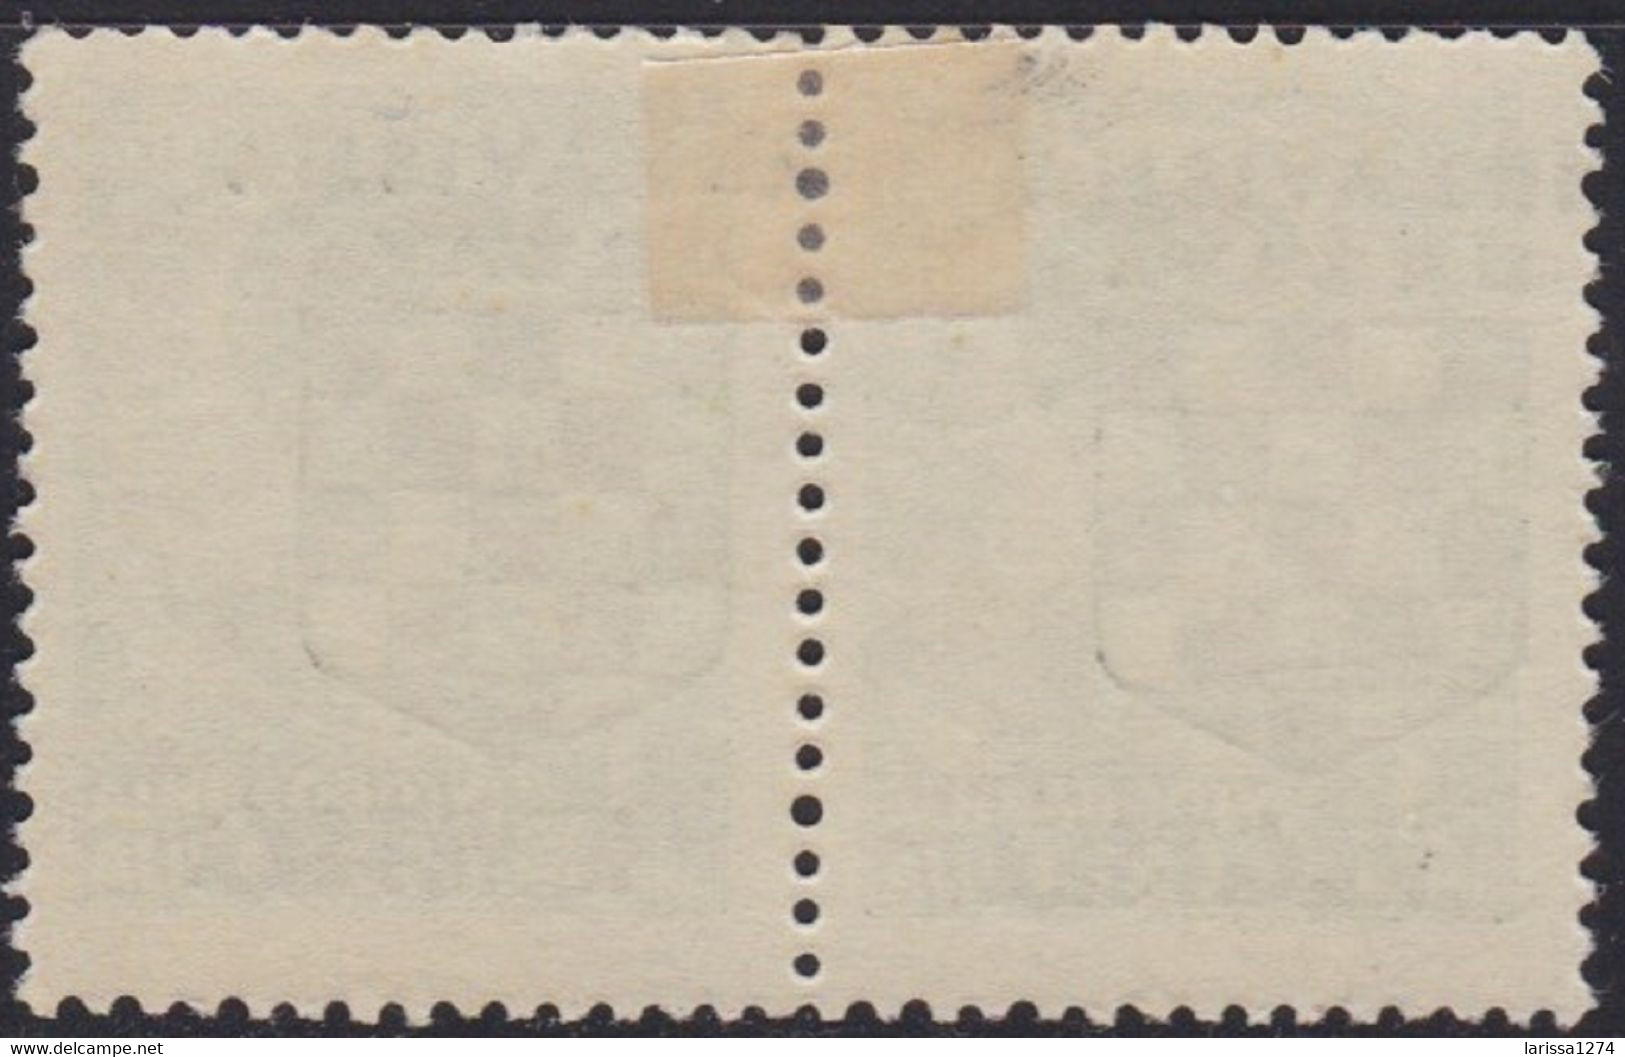 466. Croatia NDH 1941 Definitive Pair ERROR Moved Overprint MH Michel #11 - Imperforates, Proofs & Errors